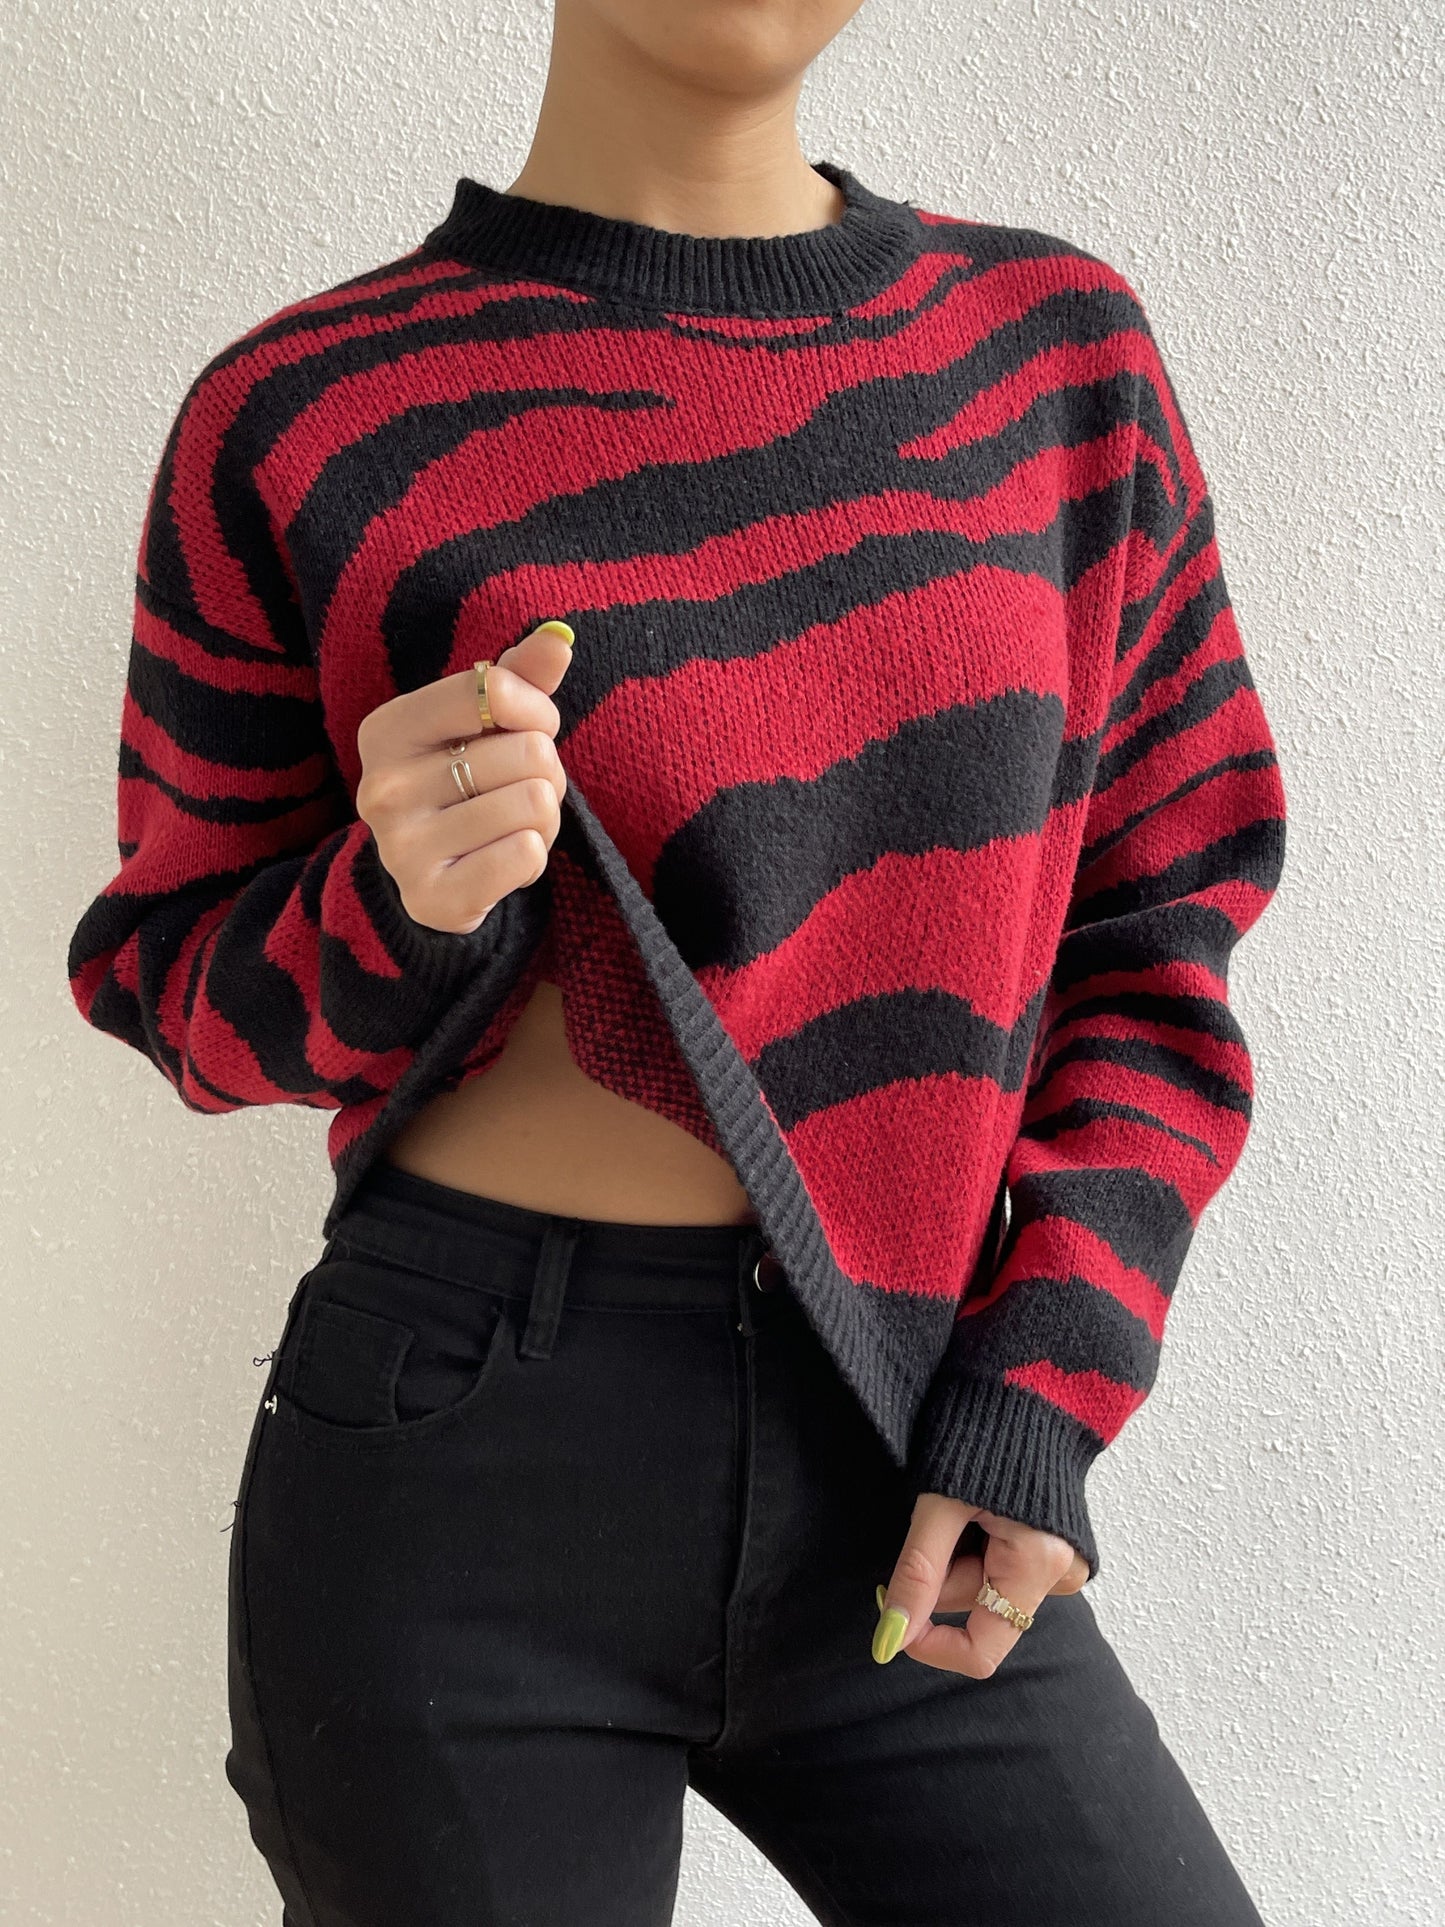 Antmvs Color Block Round Neck Long Sleeve Sweater, Vintage Jacquard Striped Comfy Autumn Sweater, Women's Clothing